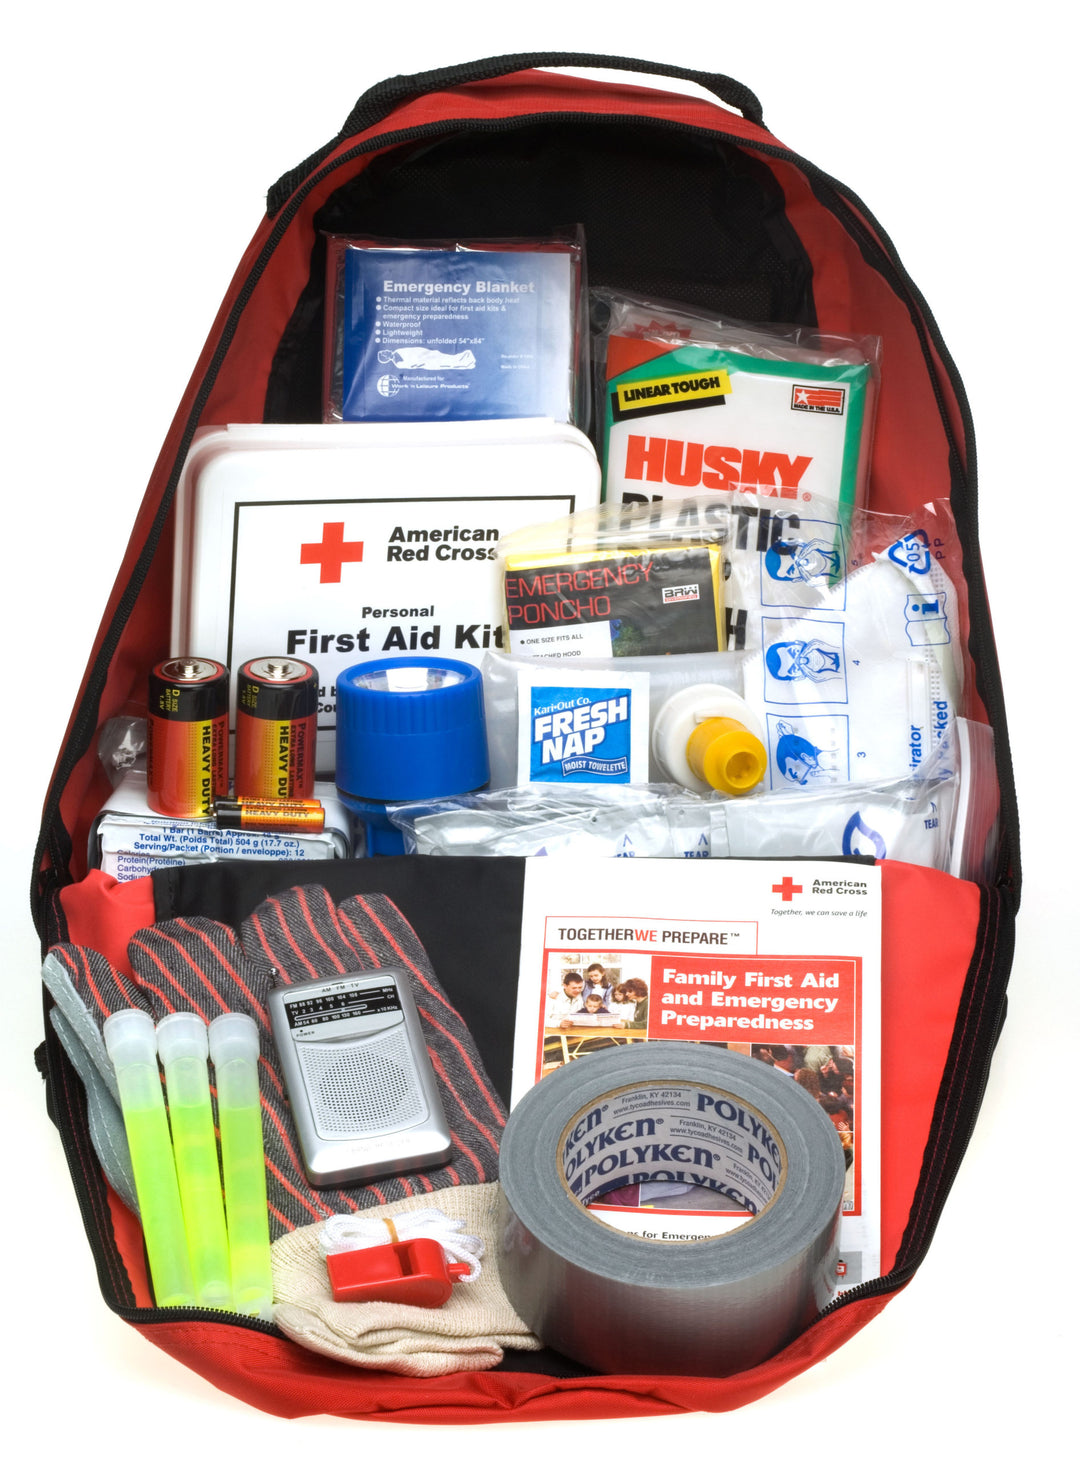 Tips For Your Own Emergency Kit